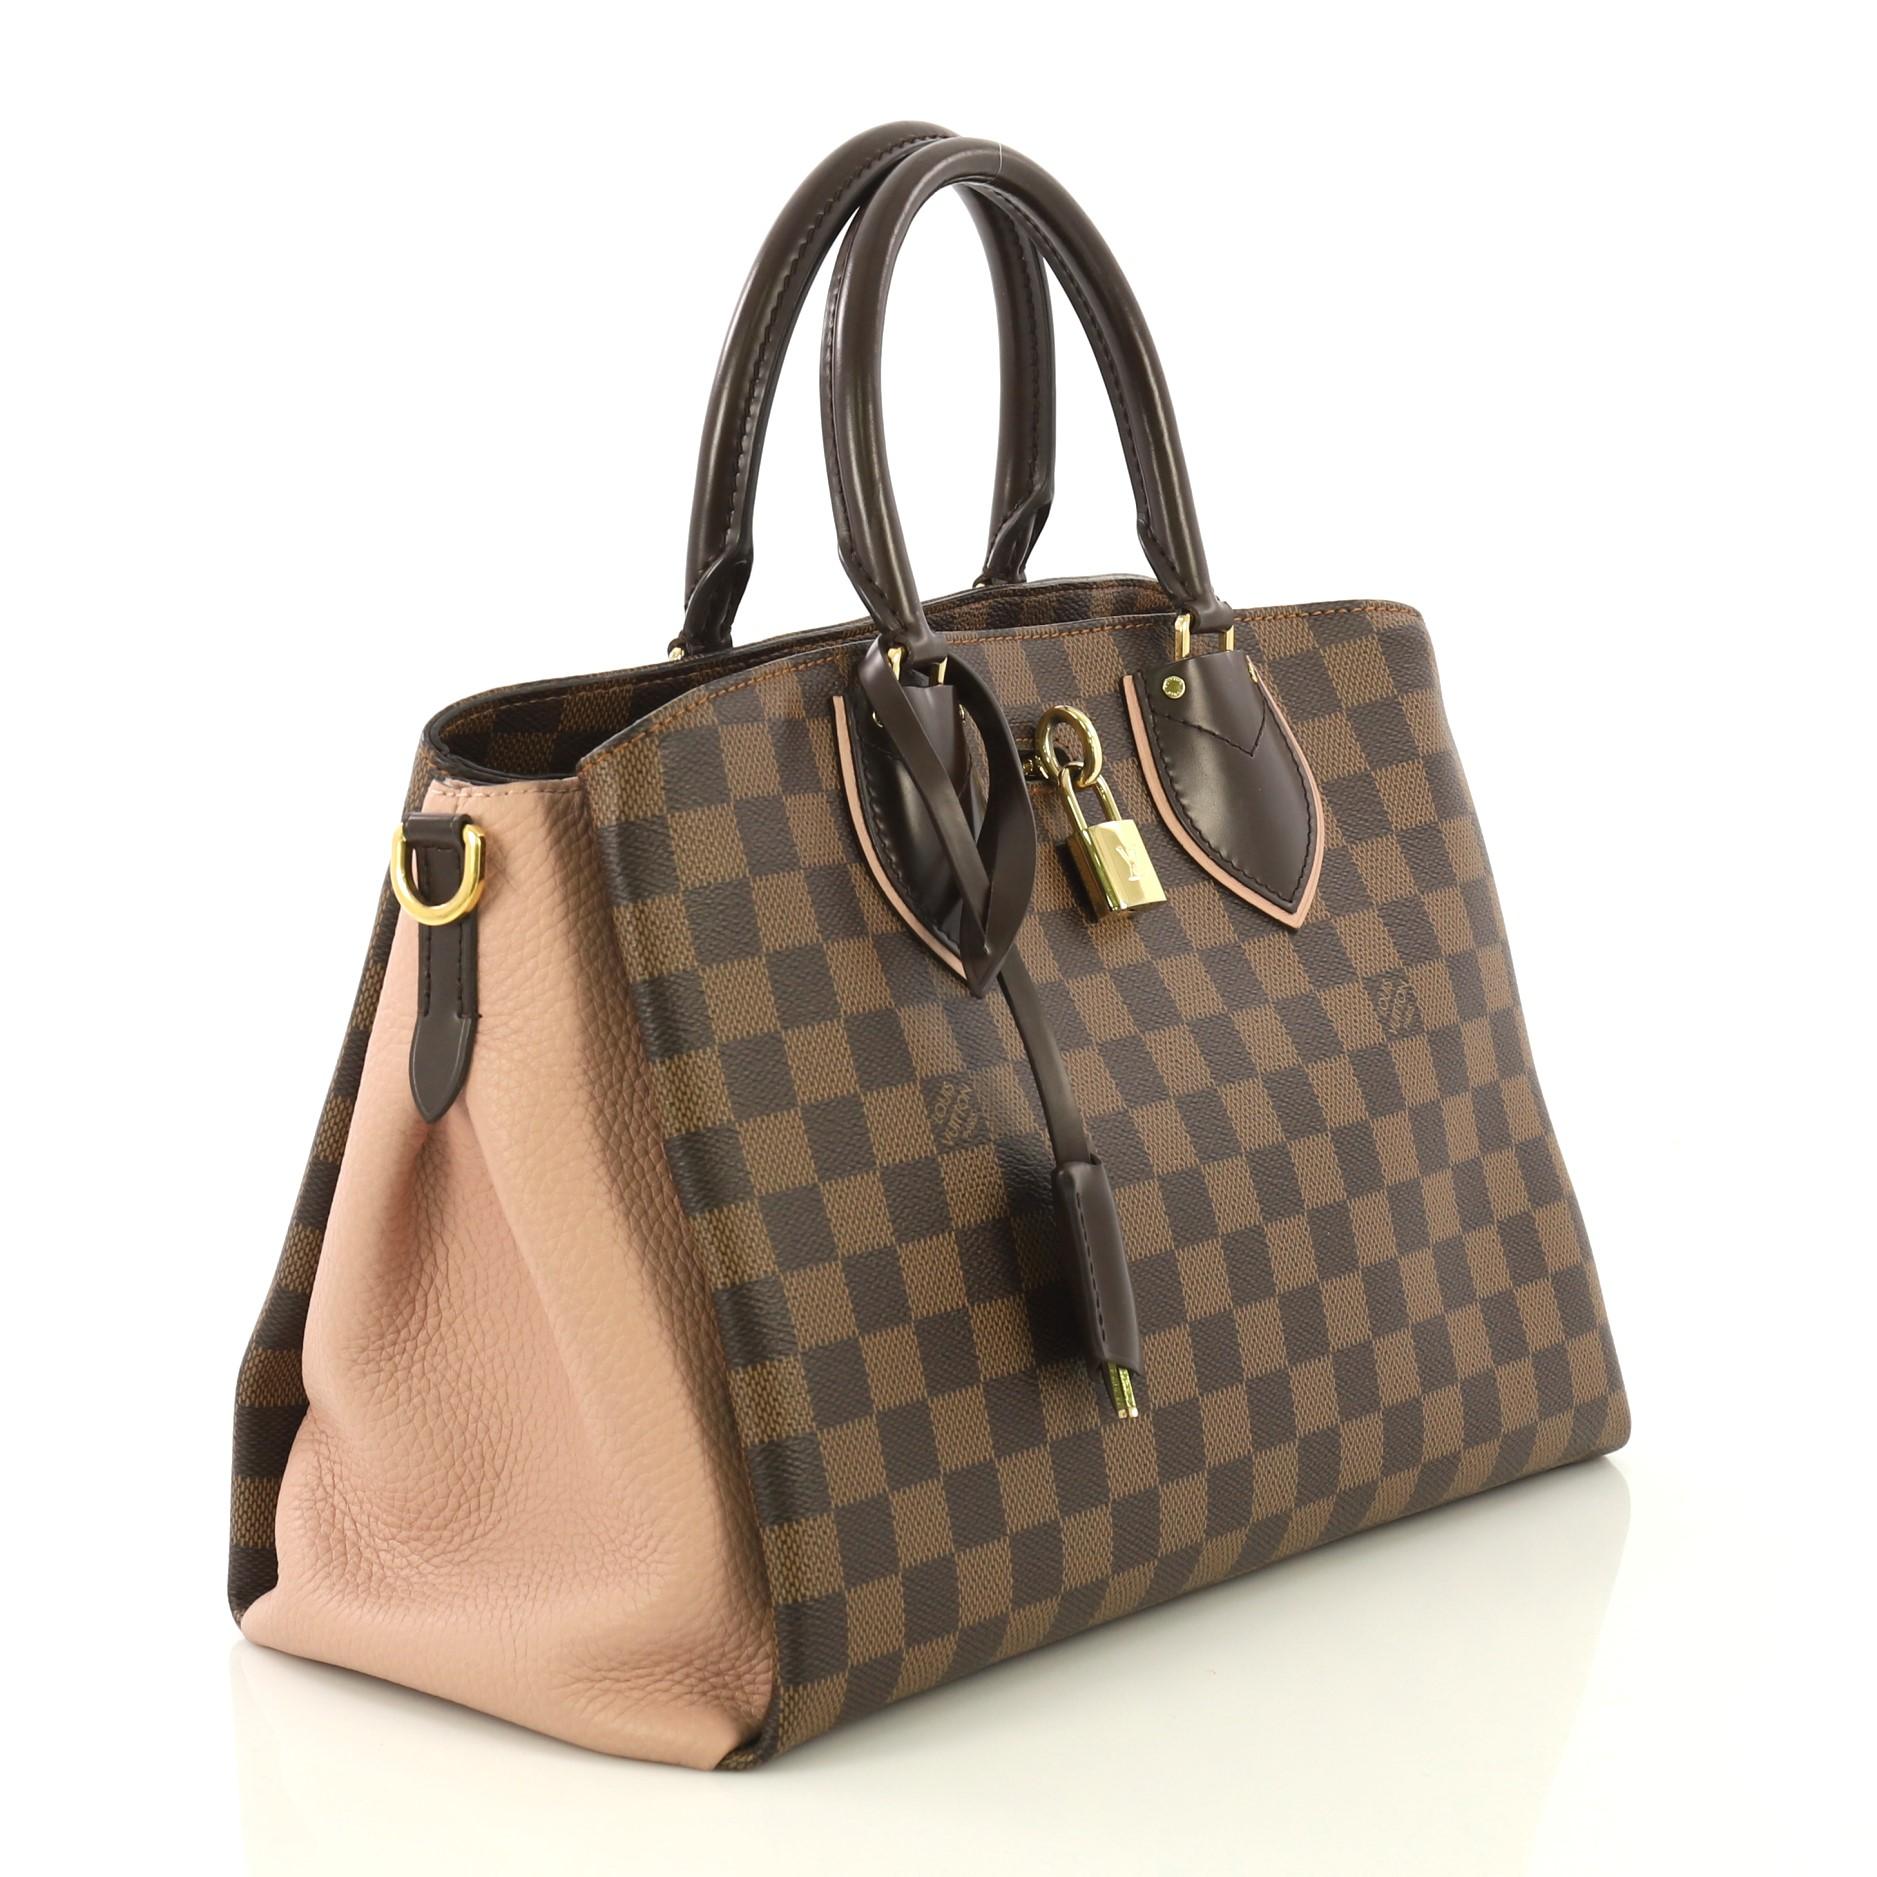 This Louis Vuitton Normandy Handbag Damier, crafted in damier ebene coated canvas, features dual rolled leather handles, leather side wings, front compartment with lock closure, and gold-tone hardware. Its middle zip compartment opens to a pink